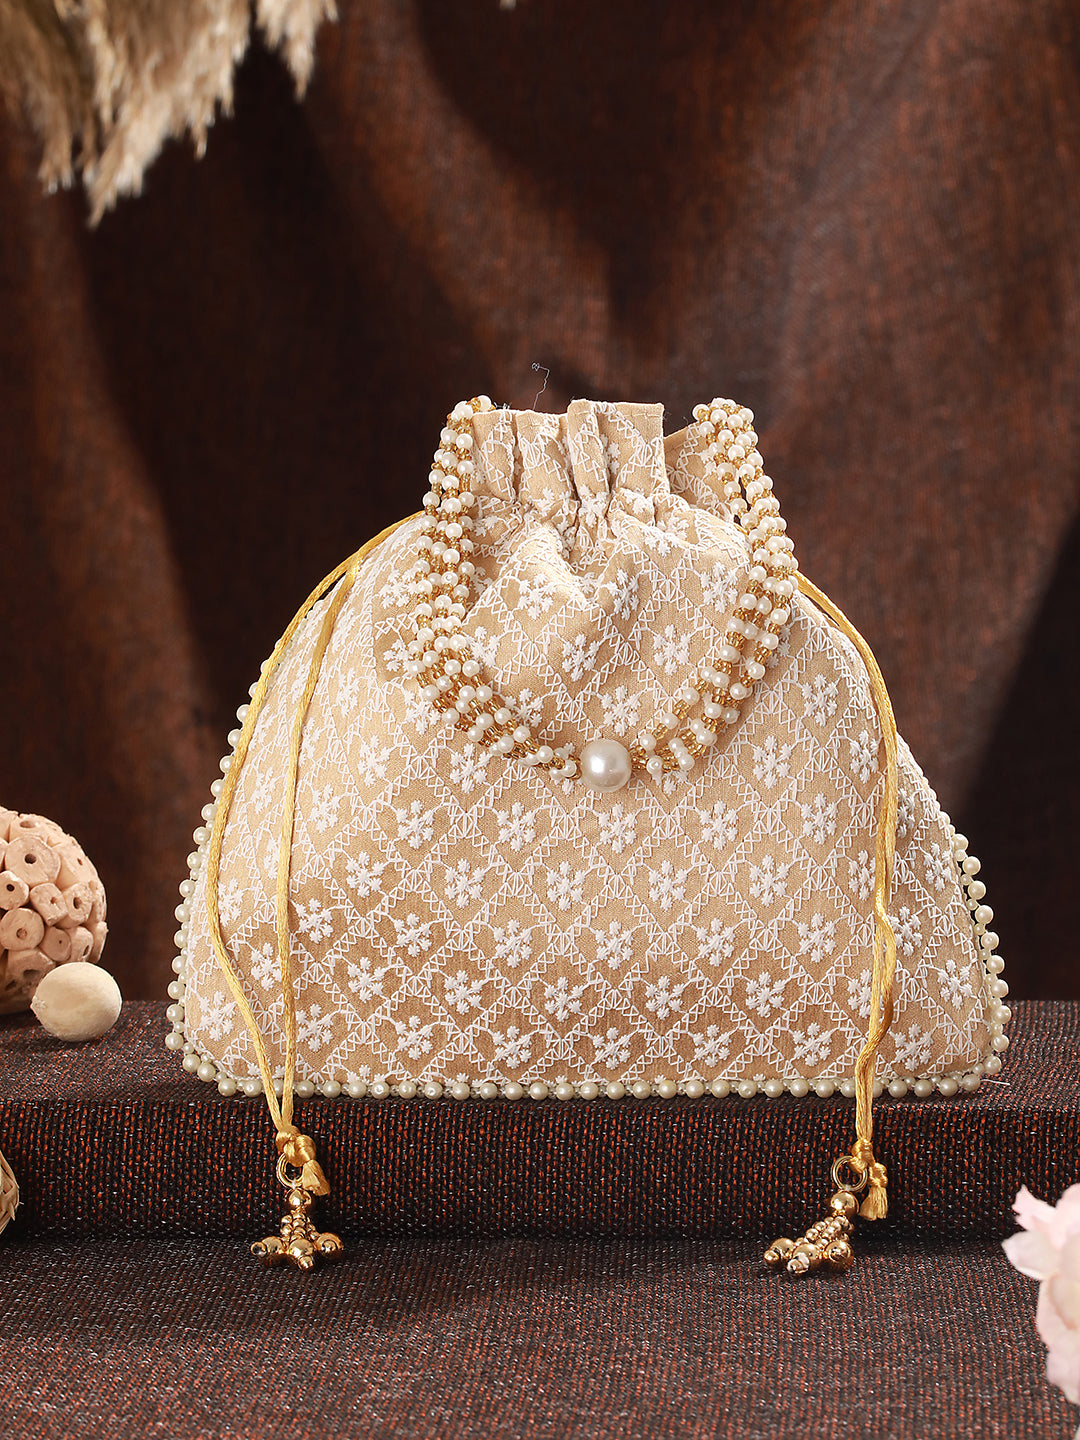 Beige & Gold-Toned Chikan Embroidered work Potli Clutch - Jazzandsizzle